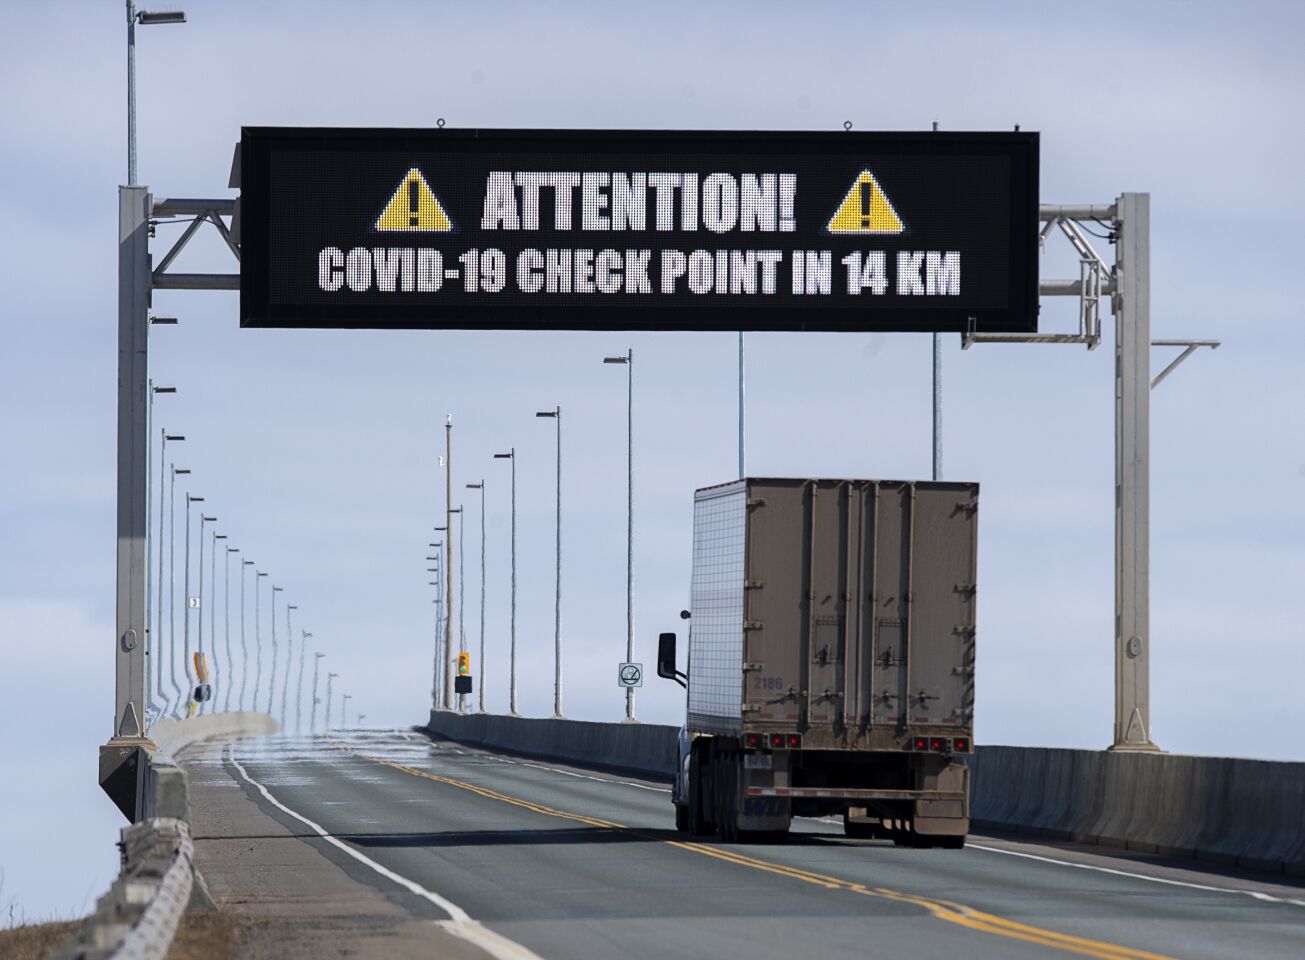 Canada: A sign indicates that provincial health department workers will stop traffic that has crossed the Confederation Bridge in Cape Jourimain, New Brunswick, Canada.